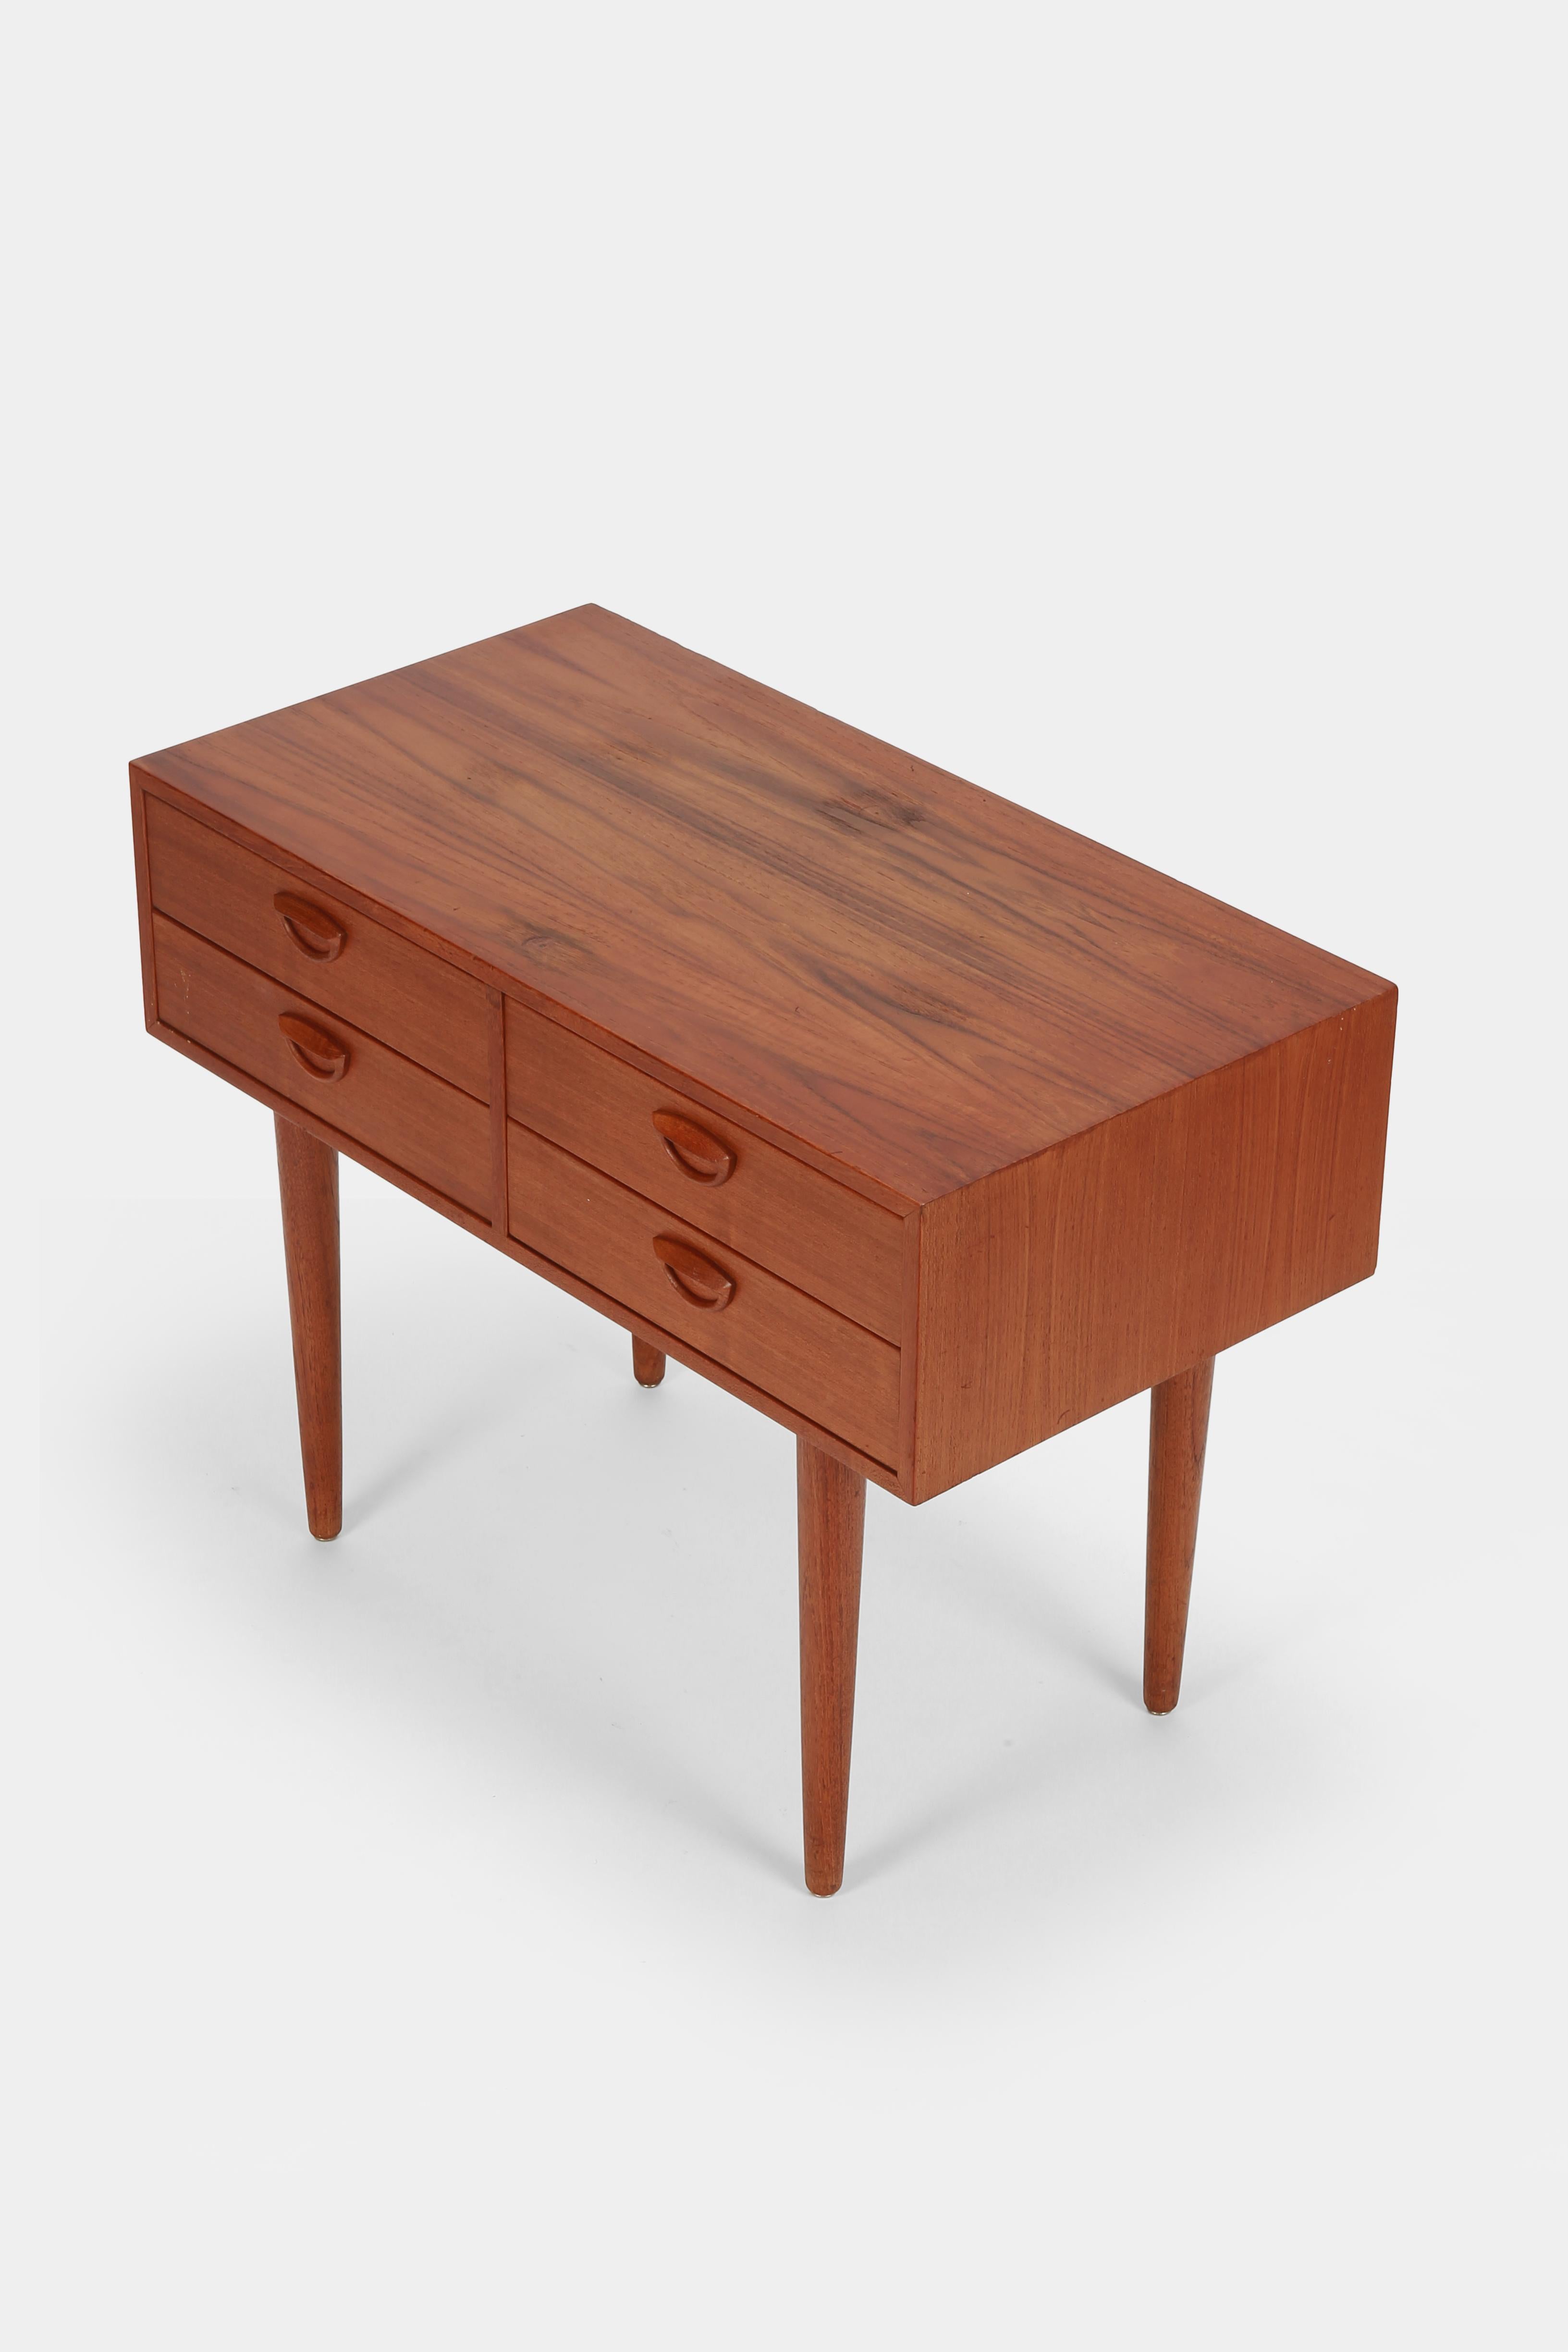 Mini sideboard by Danish designer Kai Kristiansen for Feldballes Møbelfabrik, designed and manufactured in the early 1960s. Made of teak with solid legs and handmade solid handles, the interior of the drawers is made of birch wood. Slight signs of